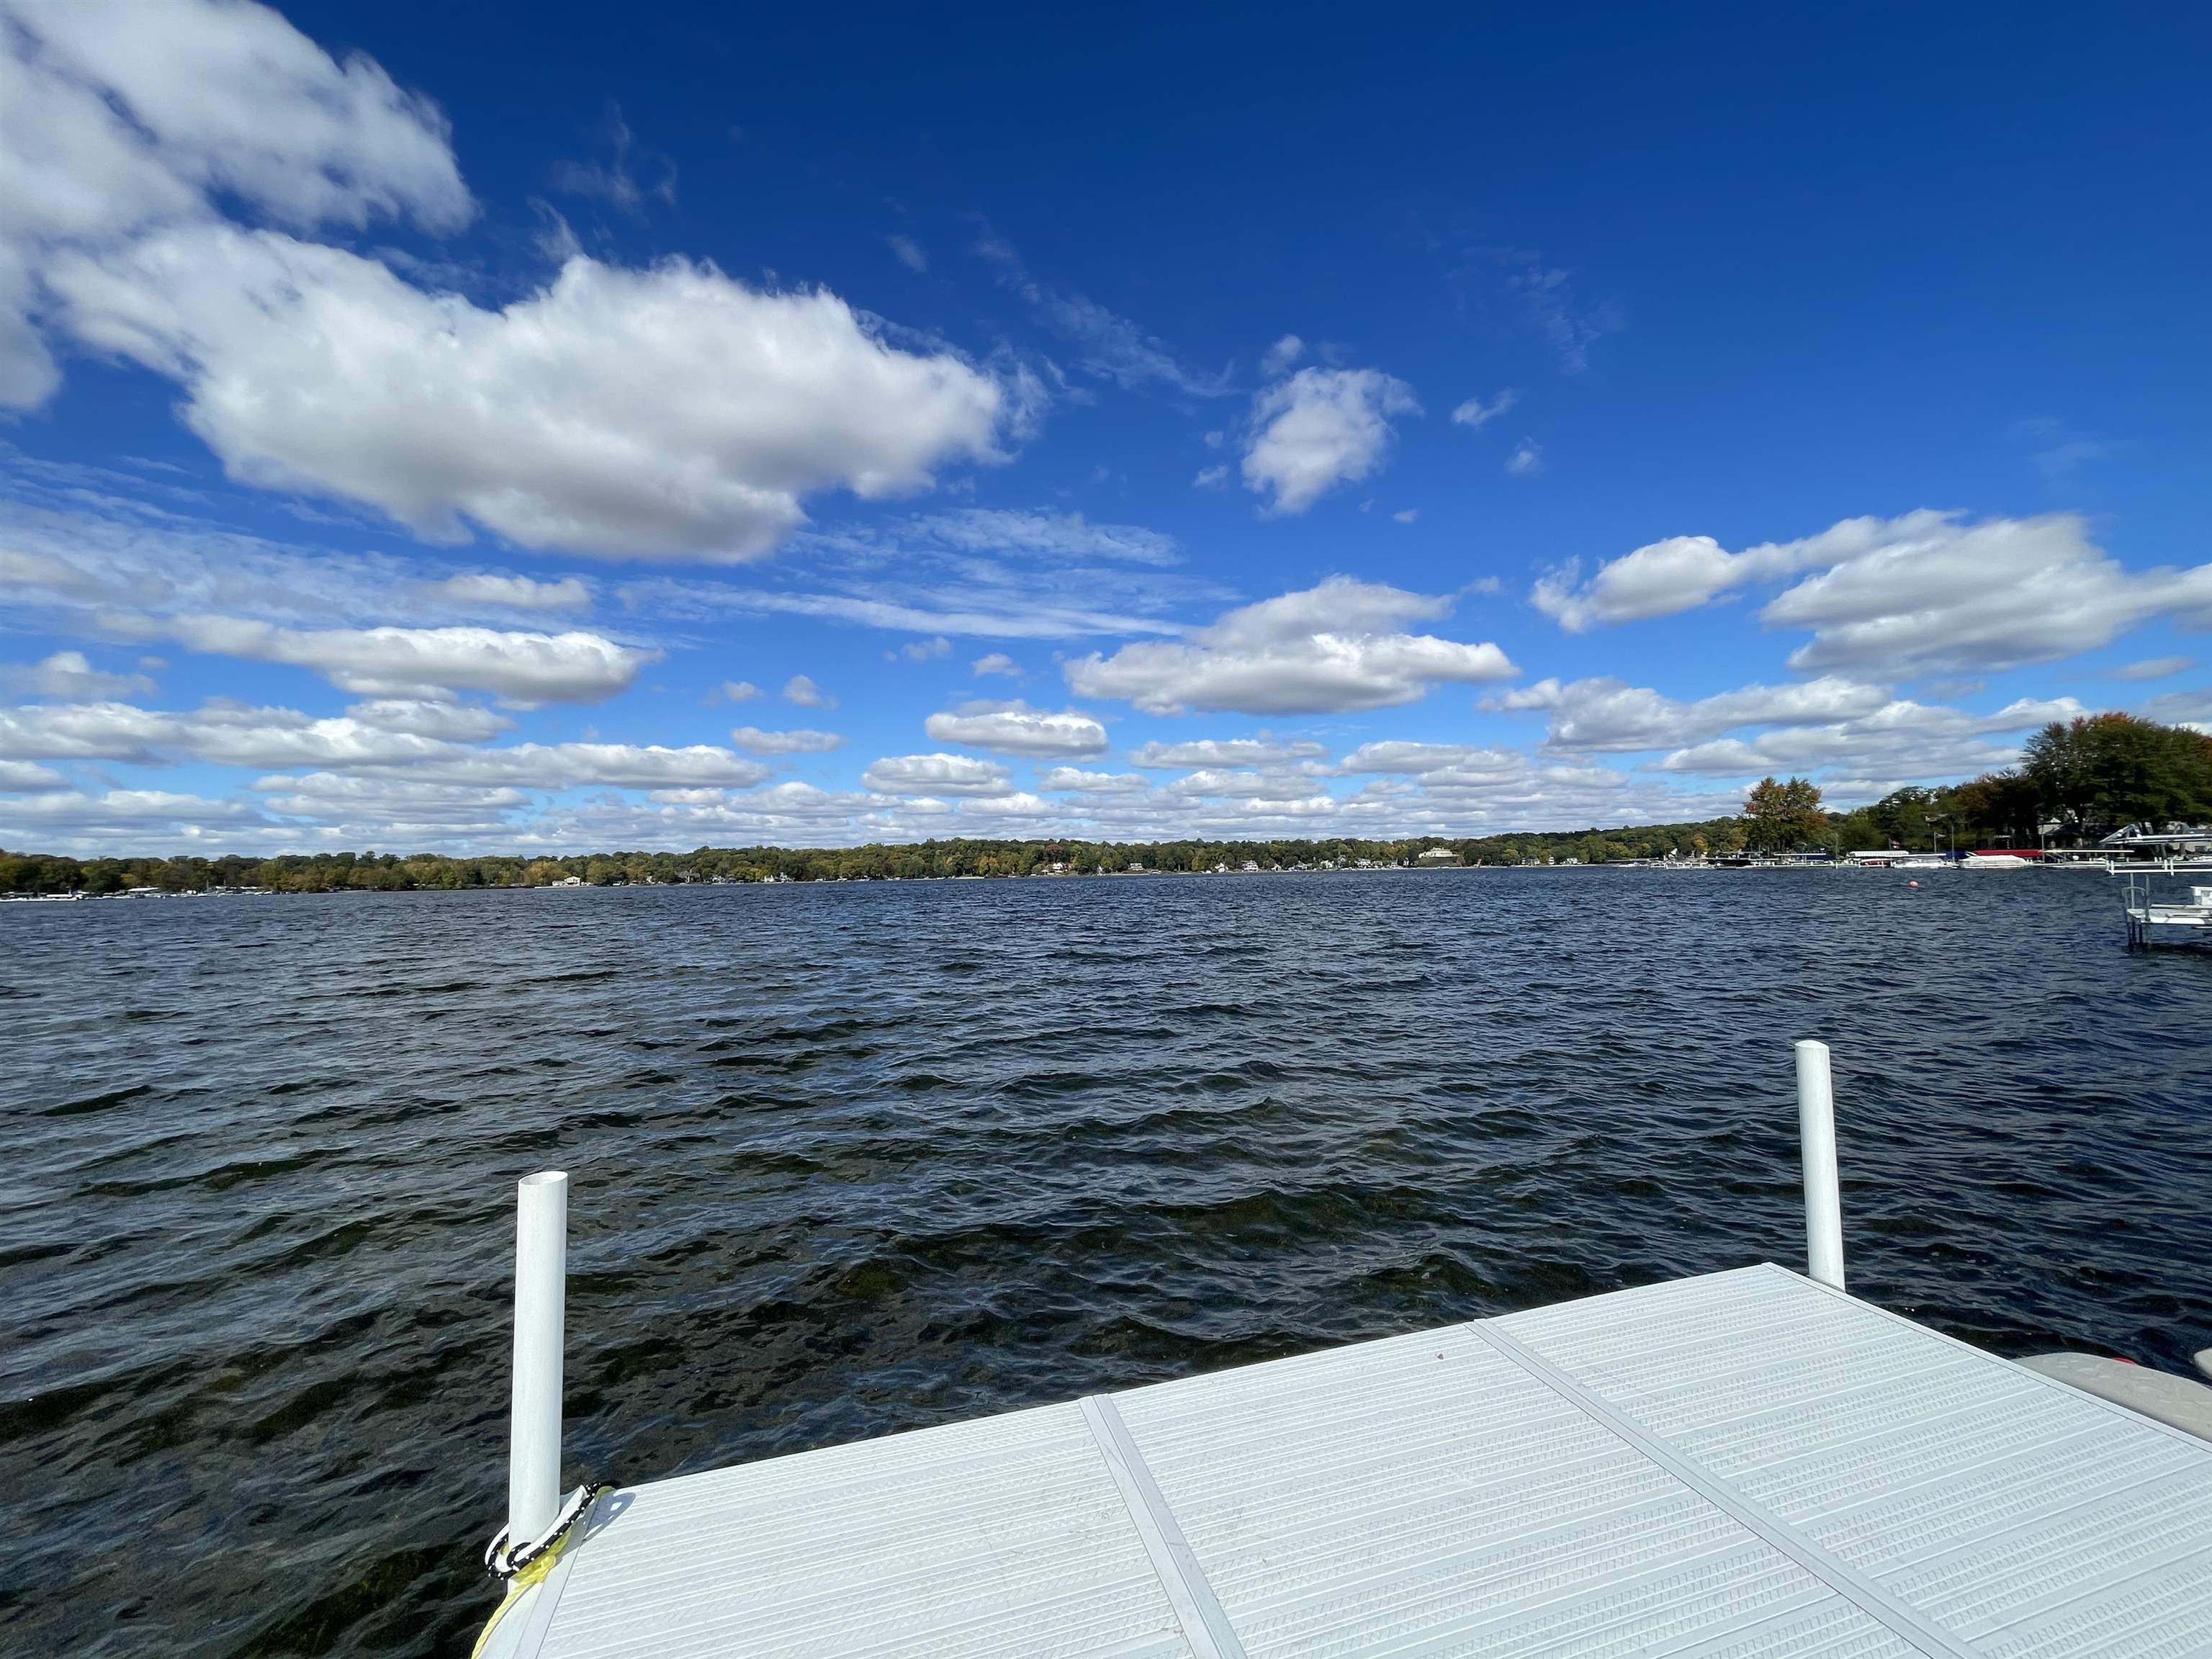 Welcome to this recently renovated lakefront property on Lake Tippecanoe.  Some renovations are still in process, however the home has so much to offer we could not wait to share it with you! 90 ft of lakefront with sunset views from this home.  Just under 5000 square foot of living space and the availability to finish even more space.  The floorplan has been opened up as soon as you walk in the front door with some walls being removed- the view from the front step draws you inside the home immediately.  A wall of windows greats you and tempts you with the fabulous lake views to stay a while.  Inside you will find an all new kitchen with custom cabinetry, commercial grade Forne Appliances in the Refrigerator, Freezer and 36 inch gas range/oven.  There are 3 bedrooms on the main level including the Primary Suite which has a brand new bathroom that is being finished up right now providing an oversized walk in shower, tile flooring, new double vanity and soaking tub perfect for this oasis.  Large walk in closet completes the space.  There is a double sided fireplace in the master as well as access to the deck, easy access to the new hot tub on the deck and lets not forget to mention the lake views.  On the opposite wing of the home, you will find 2 additional bedrooms and 2 additional full bathrooms as well as a sunroom w Conceirge Center/Coffee Station and access to front deck/lakeside yard.  Laundry room and separate entrance are also found on this level- providing the opportunity to rent out upper level for vacationers if needed.  Upstairs you will find an expansive family room- vaulted ceilings and a wall of windows to make the most of the lake views.  Balcony/porch overlooking the yard and lake as well as 2 more additonal bedrooms and full bath- and there is even a loft with fireplace that could be an office, additional bedroom or what ever space would be needed.  Lots of options in this wonderful home on the shores of Lake Tippecanoe- and all sports lake.  Sewers will be coming thru in the future.